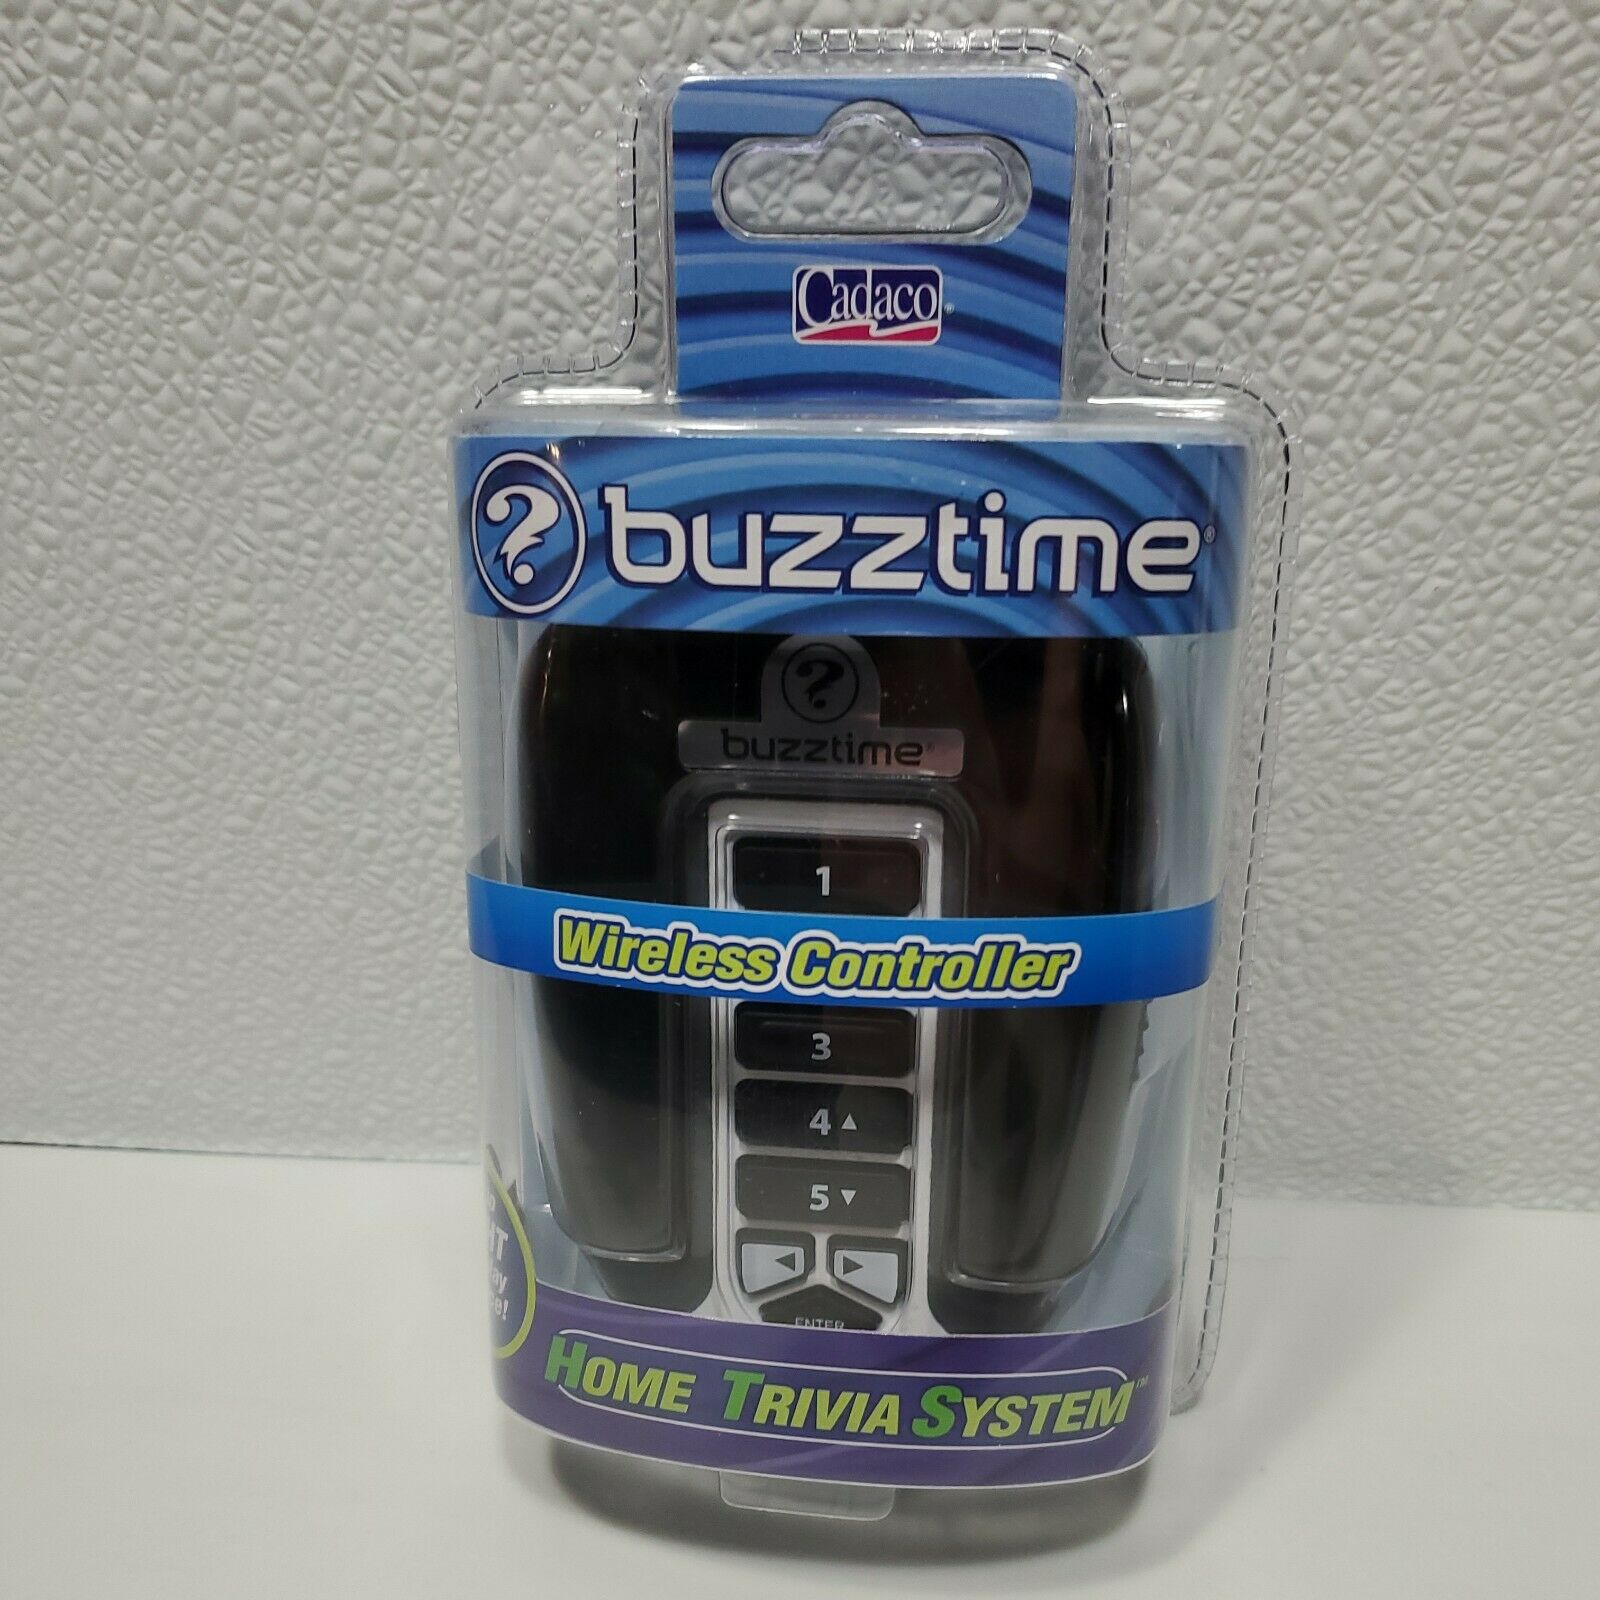 New Buzztime Black Wireless Controller For Home Trivia System Nip By Cadaco